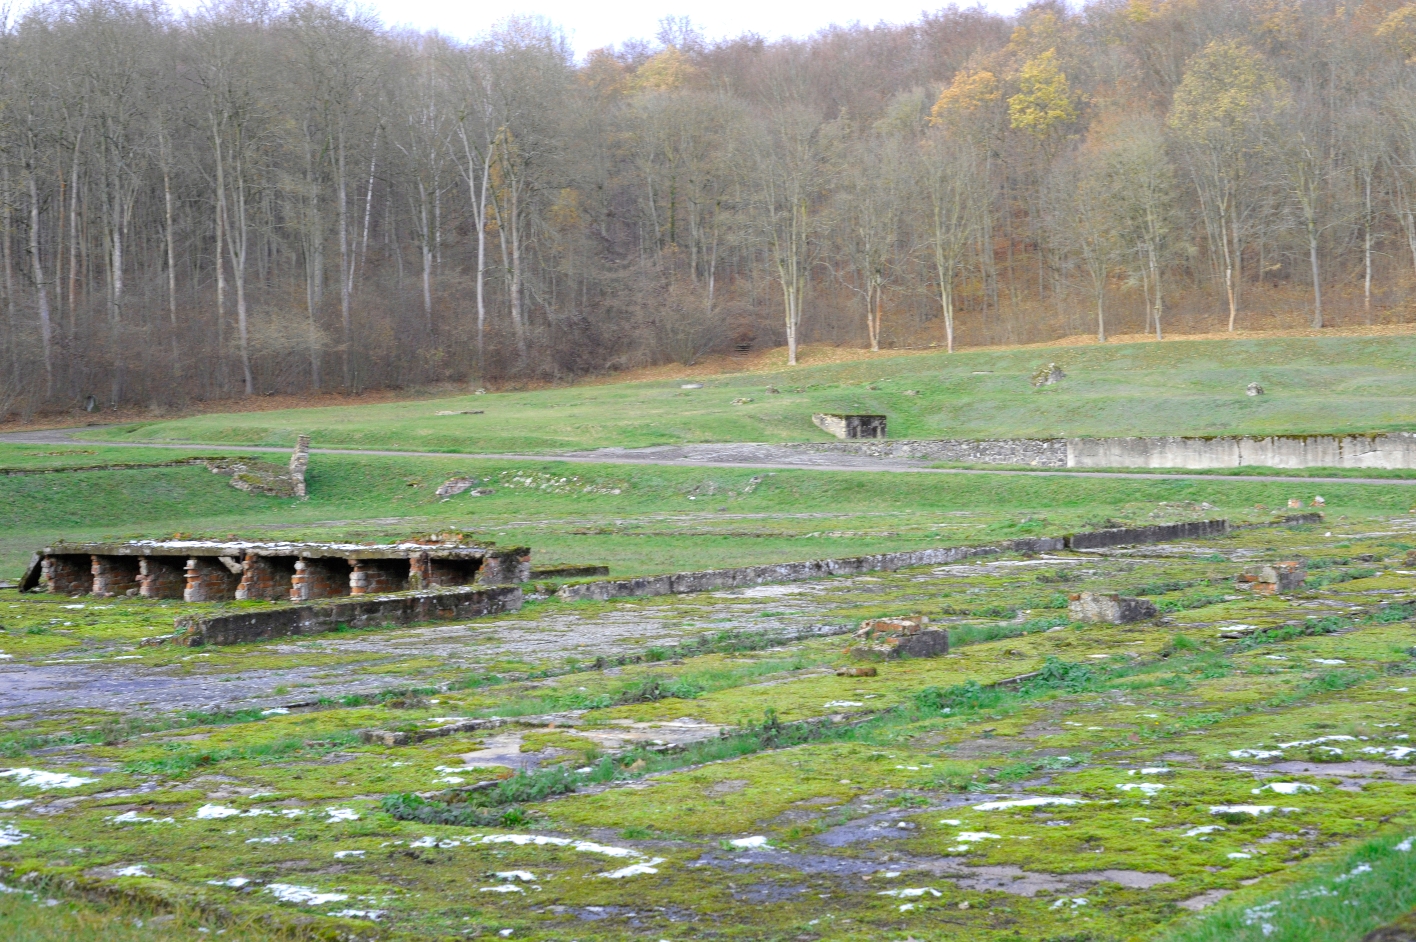 A large, flat stone surface can be seen in front of a late autumn forest. On the left you can see a series of wall niches.